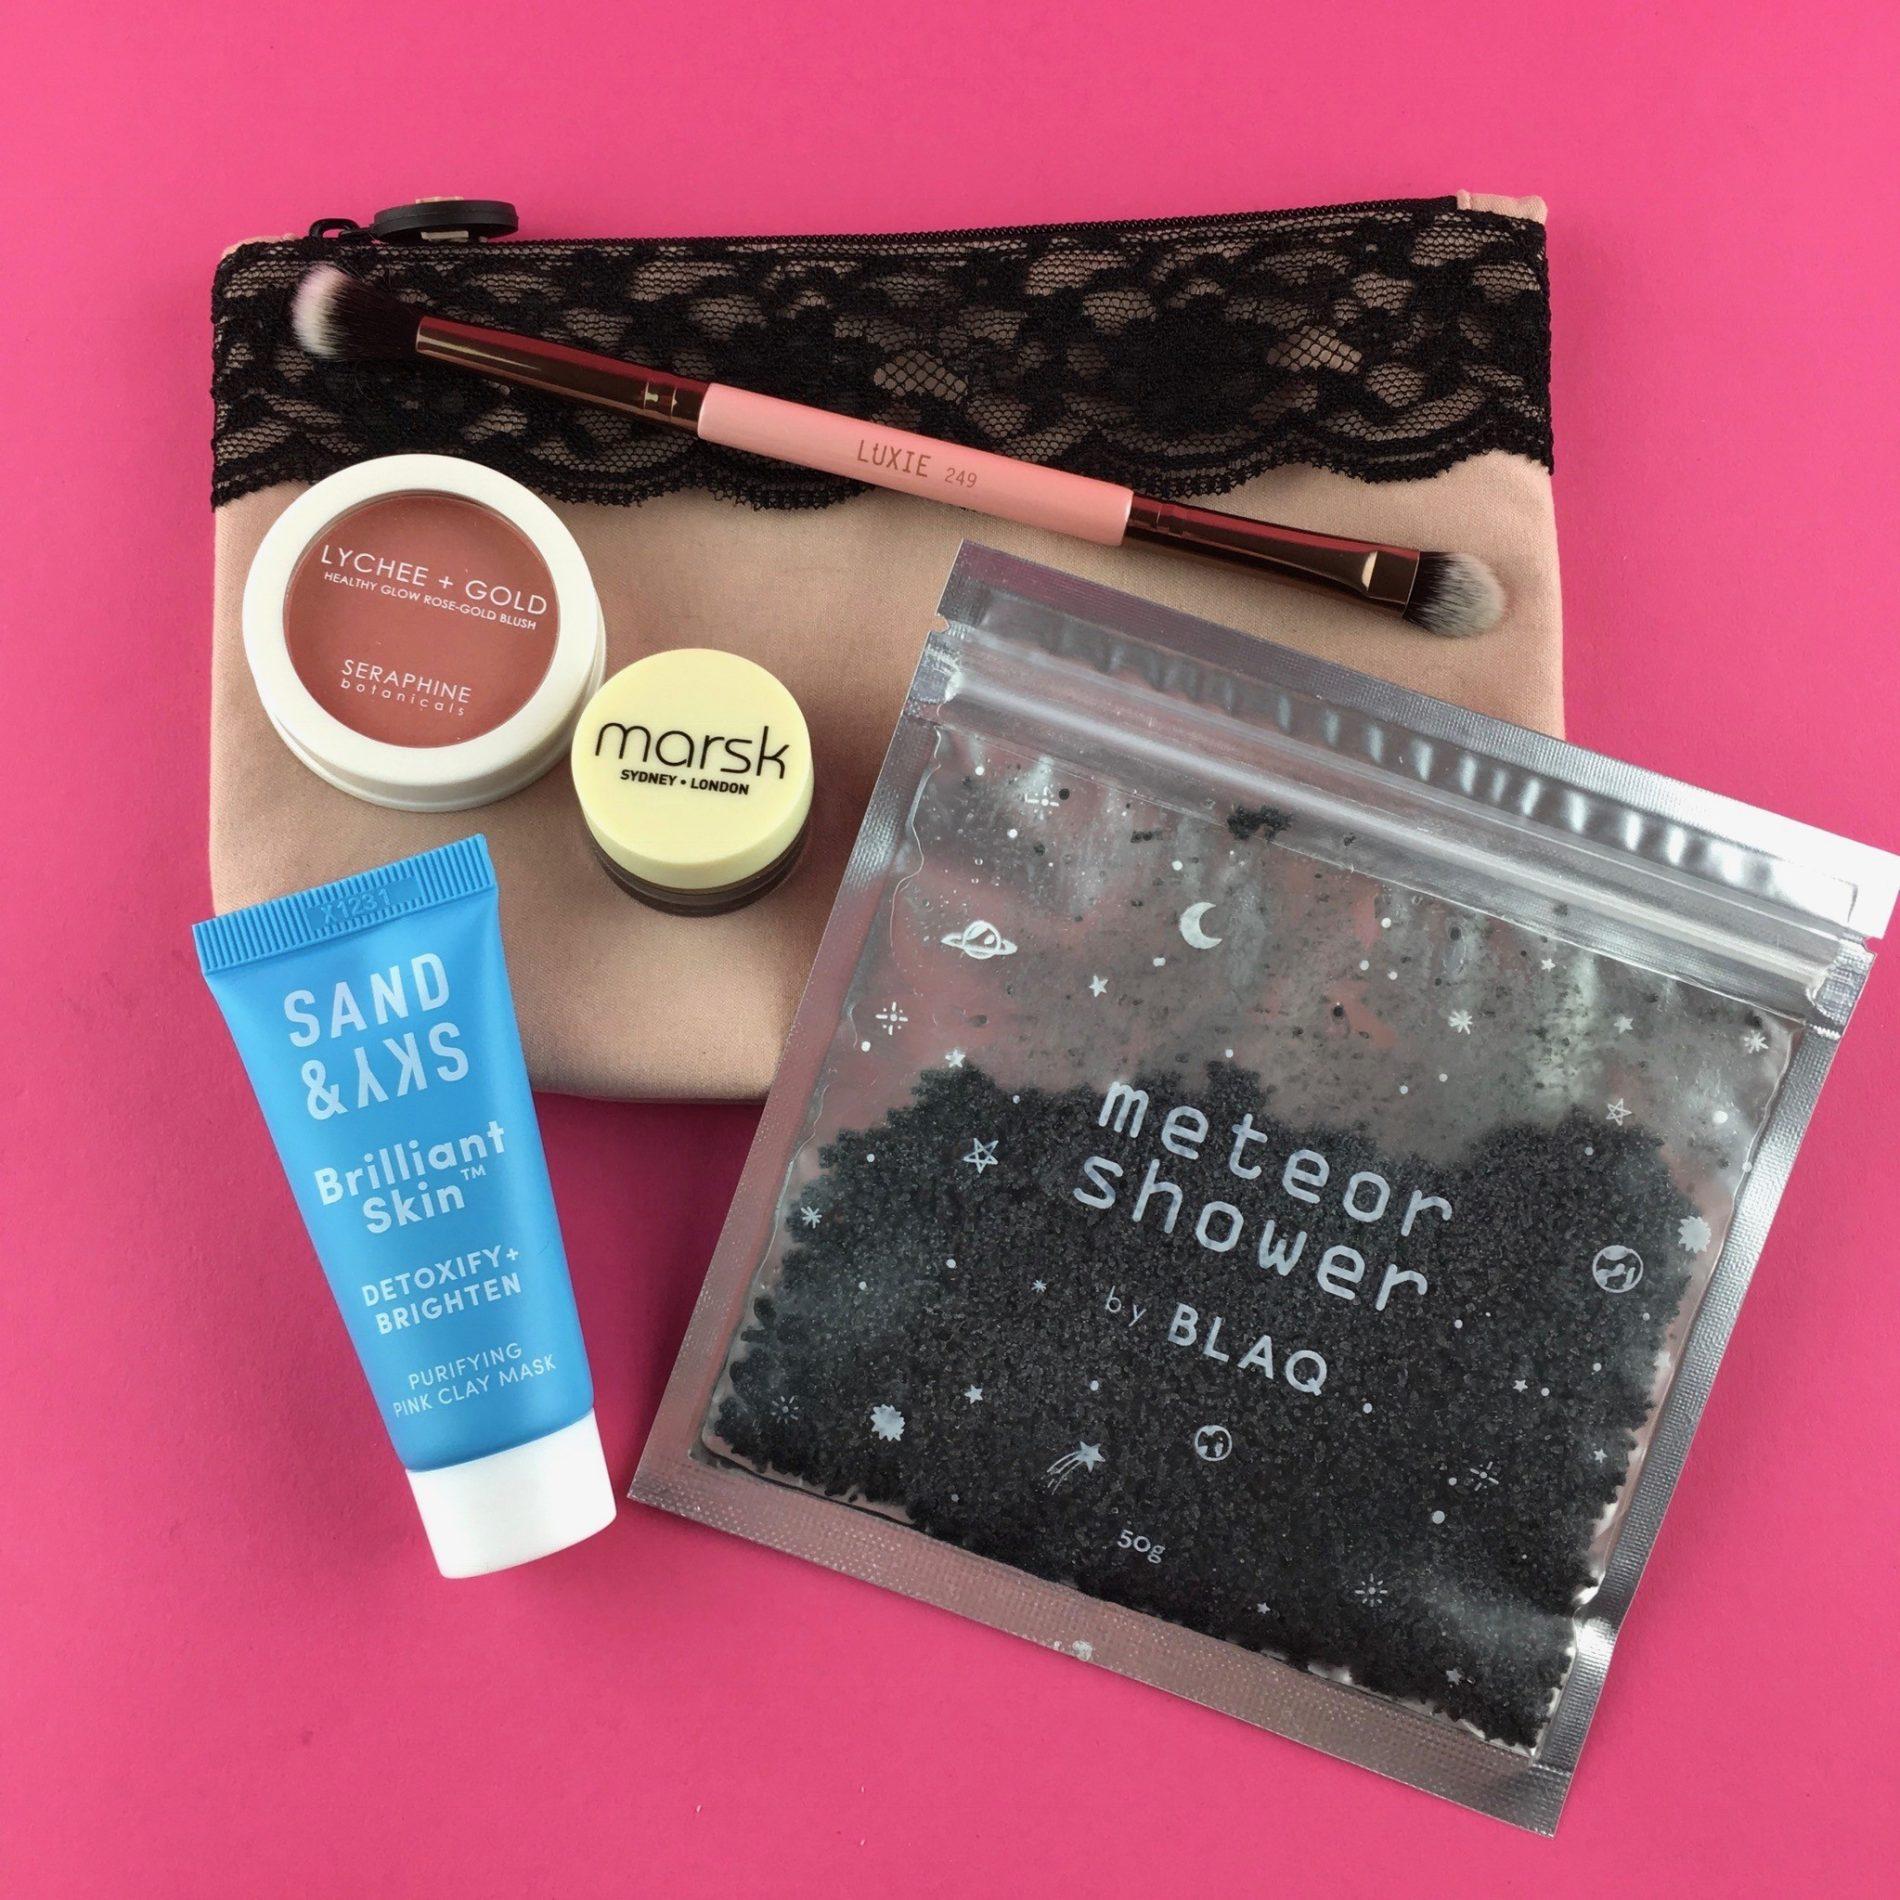 ipsy Review – February 2018